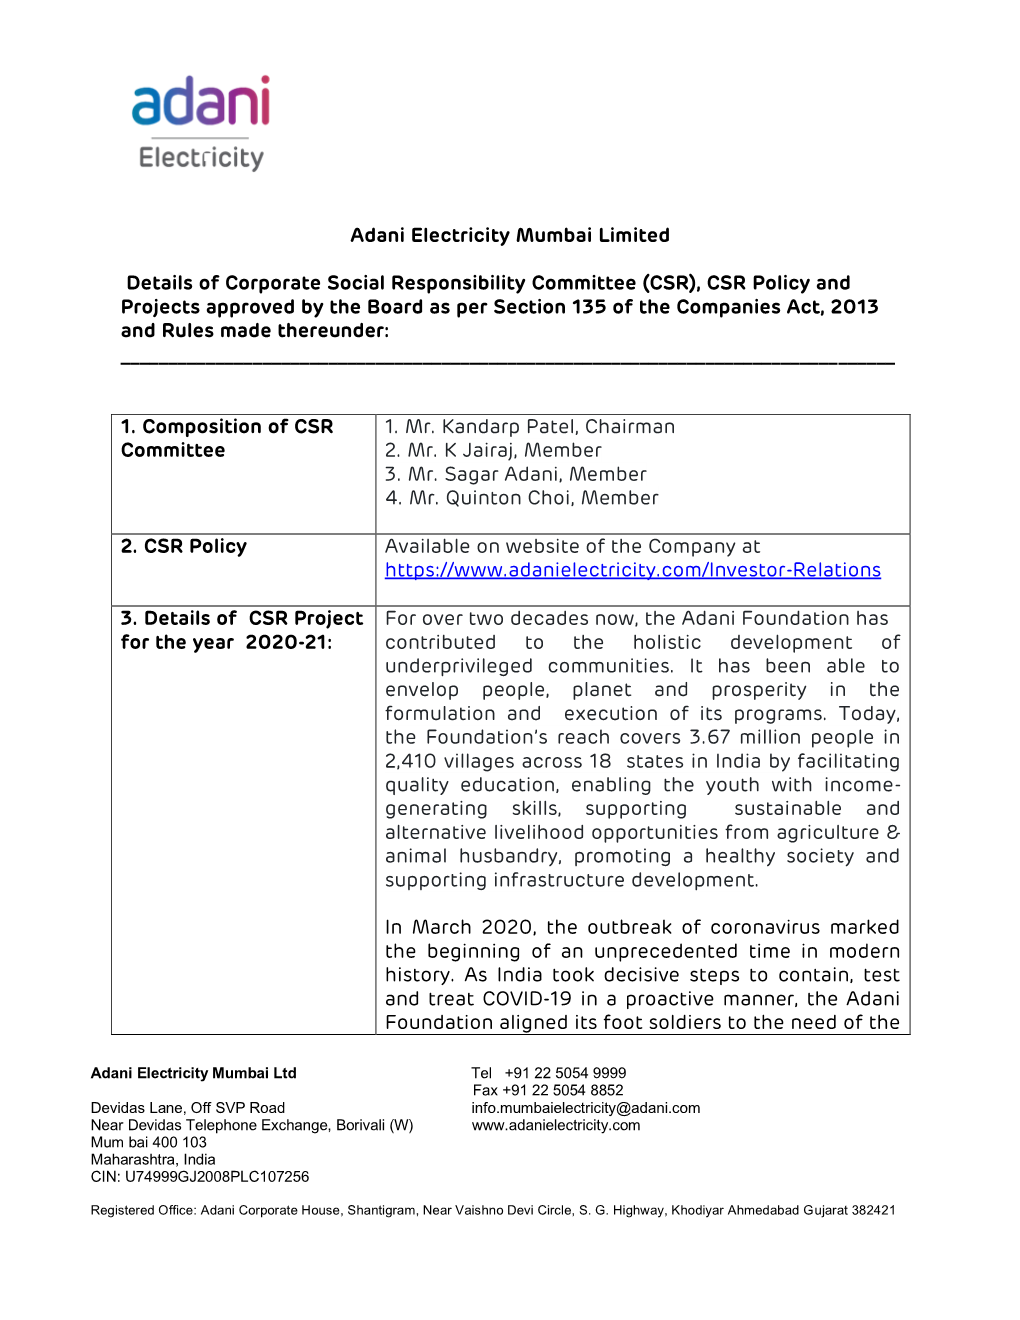 Adani Electricity Mumbai Limited Details of Corporate Social Responsibility Committee (CSR), CSR Policy and Projects Approved By